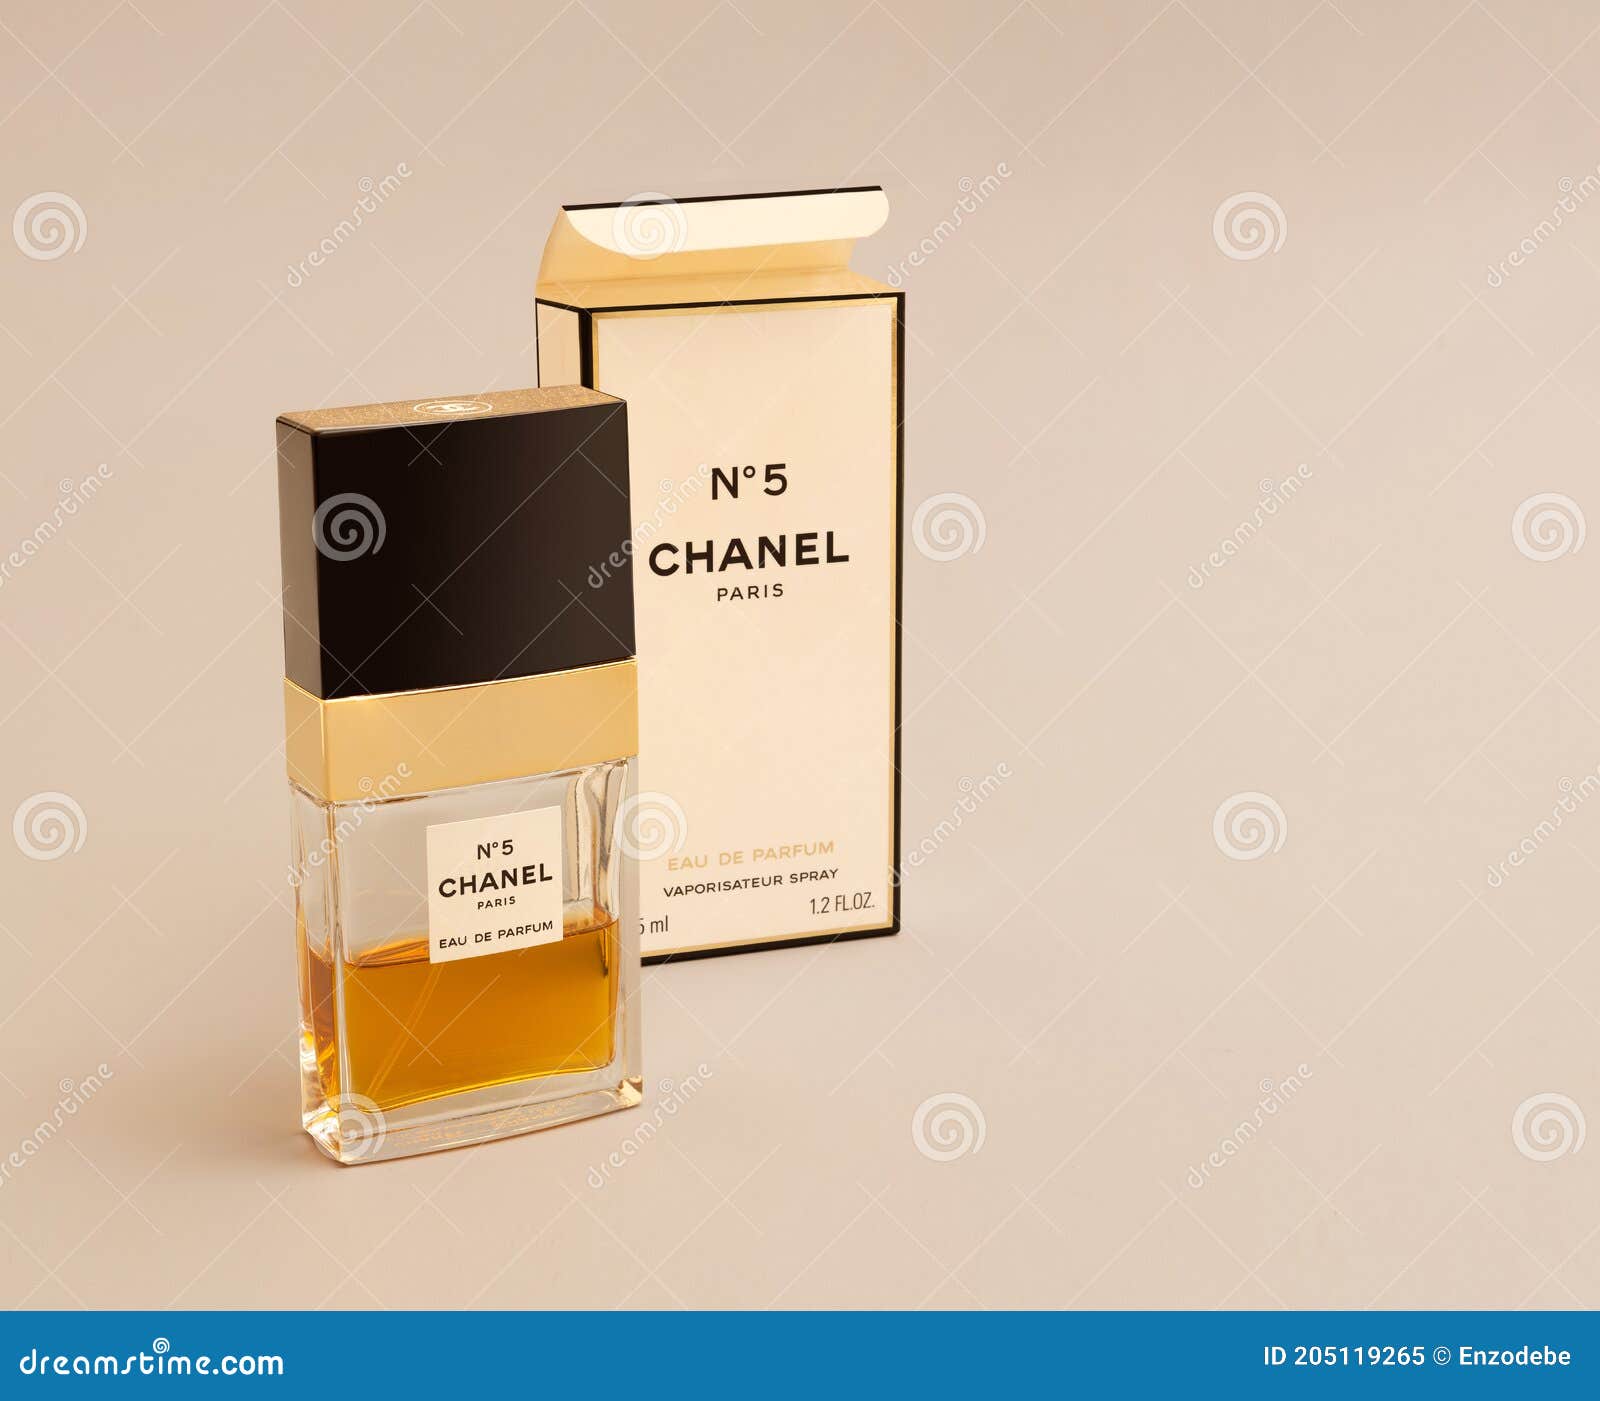 584 Bottle Chanel Stock Photos - Free & Royalty-Free - Dreamstime